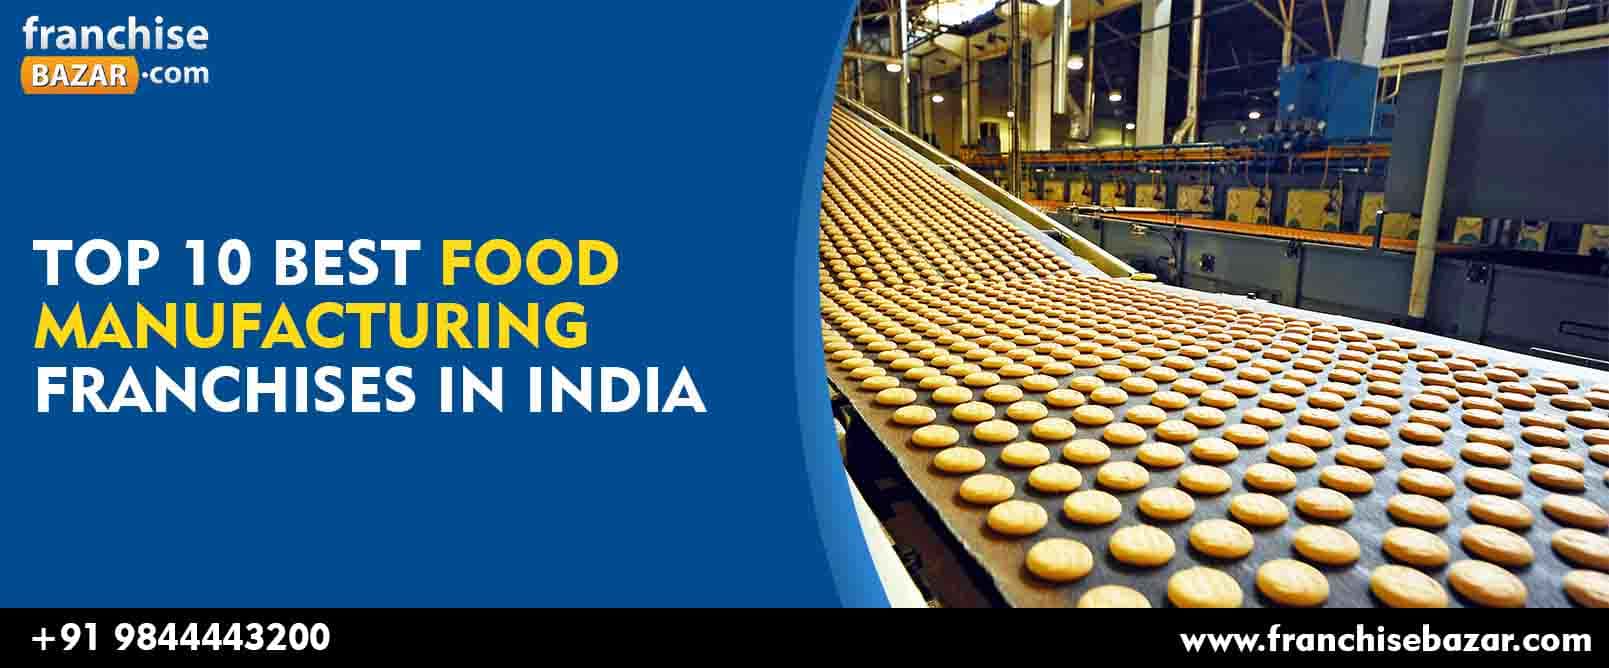 Top 10 Best Food Manufacturing Franchises in India